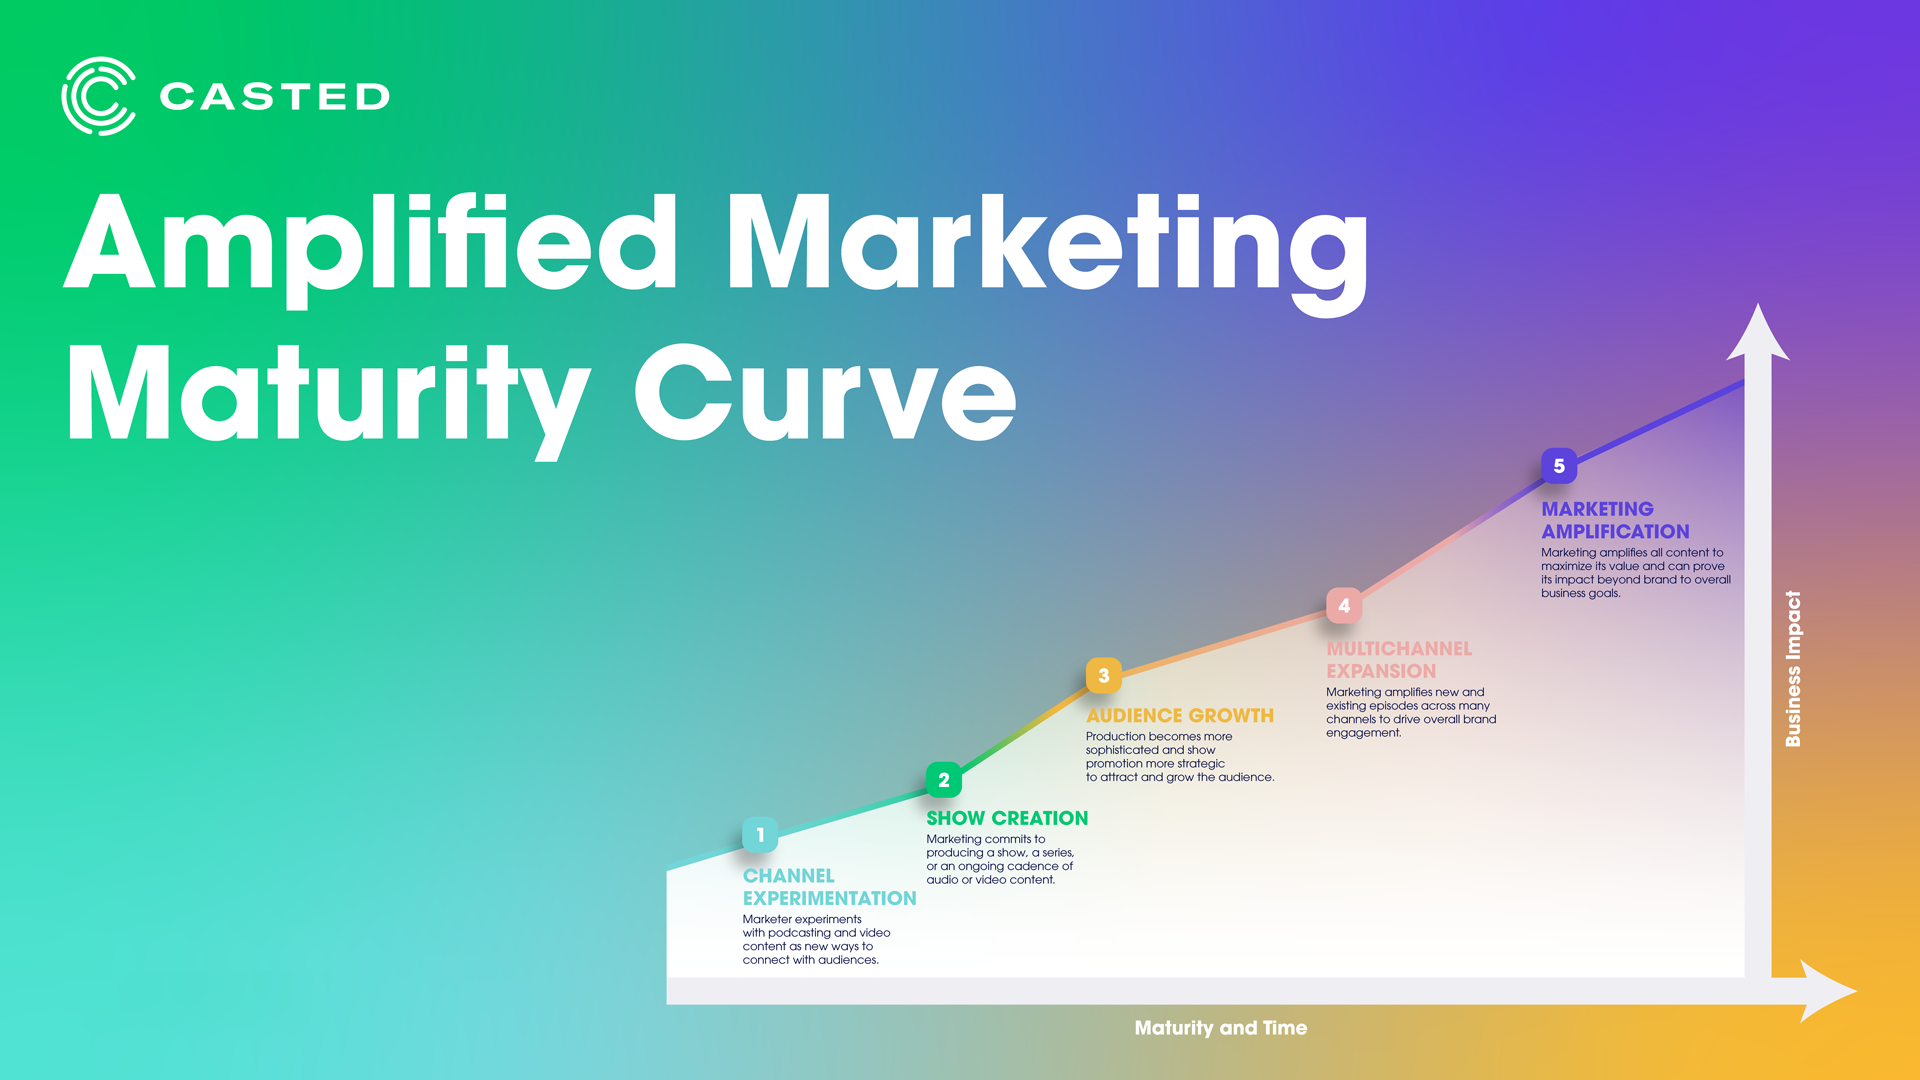 The Next Generation of B2B Content Marketing: The Amplified Marketing Maturity Curve